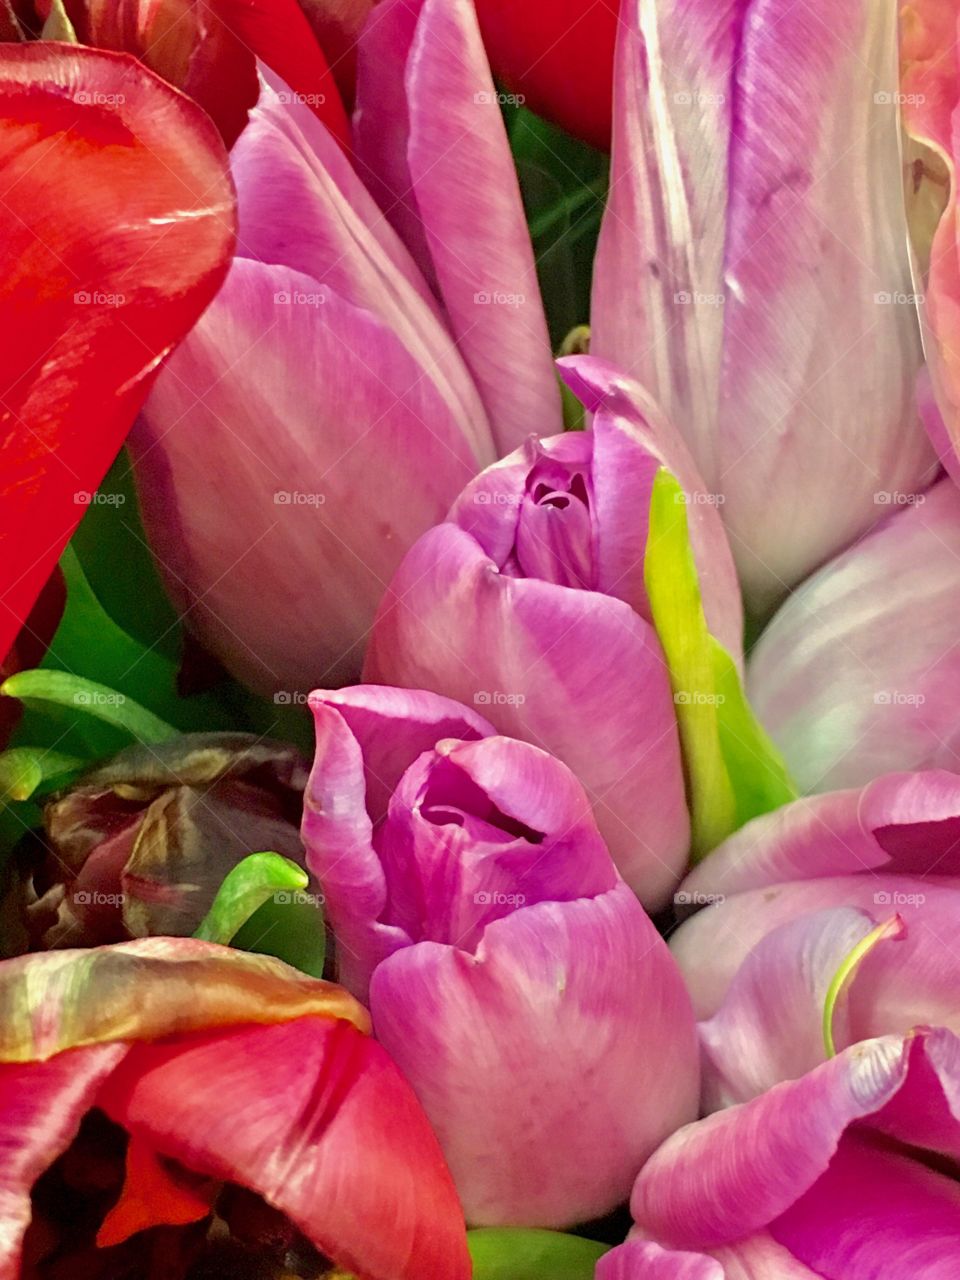 Hot Pink Tulips 